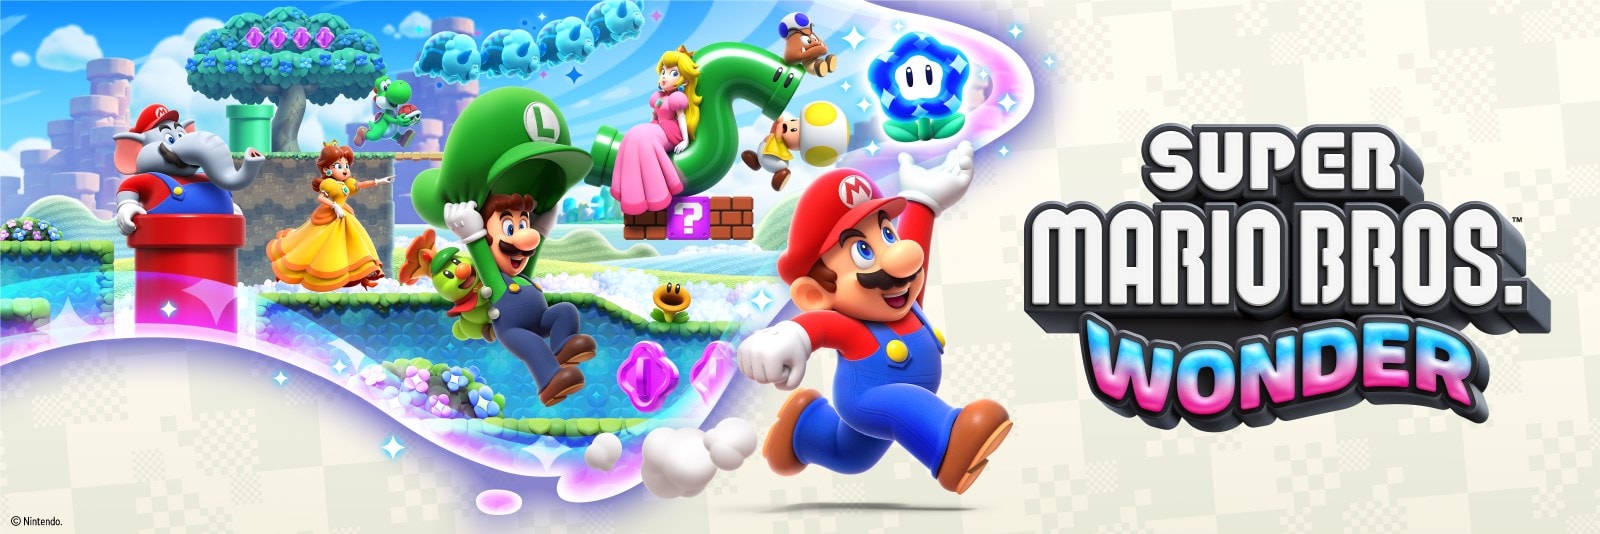 Super Mario Bros Wonder banner image, with Mario and Luigi running over a colorful background, and the game logo on the right.